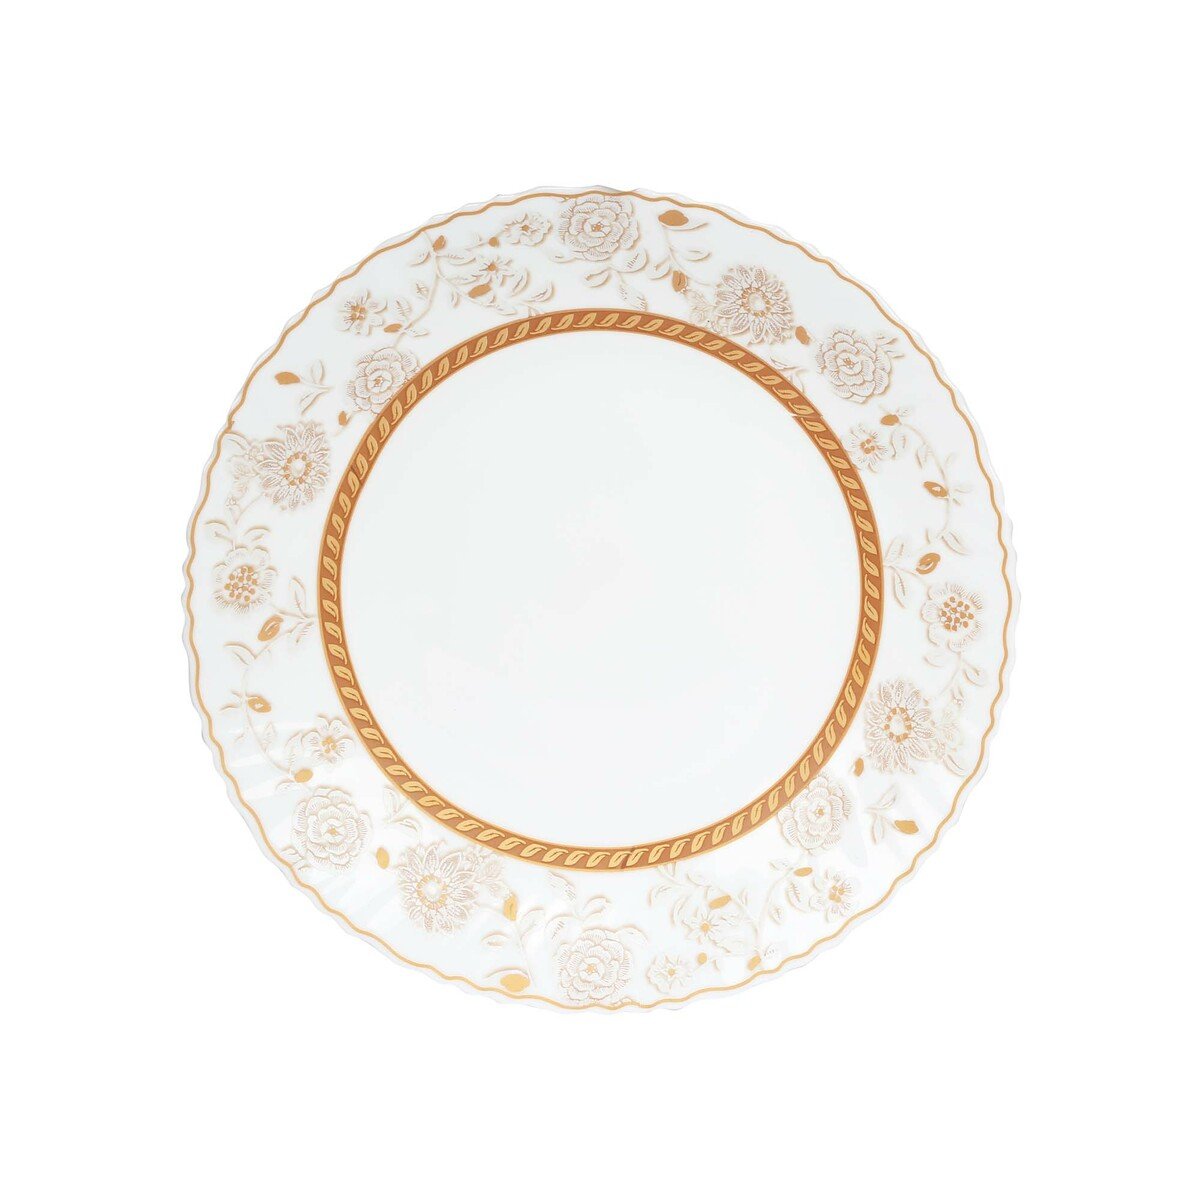 Chefline Soup Plate 8.5in 160203 FLO